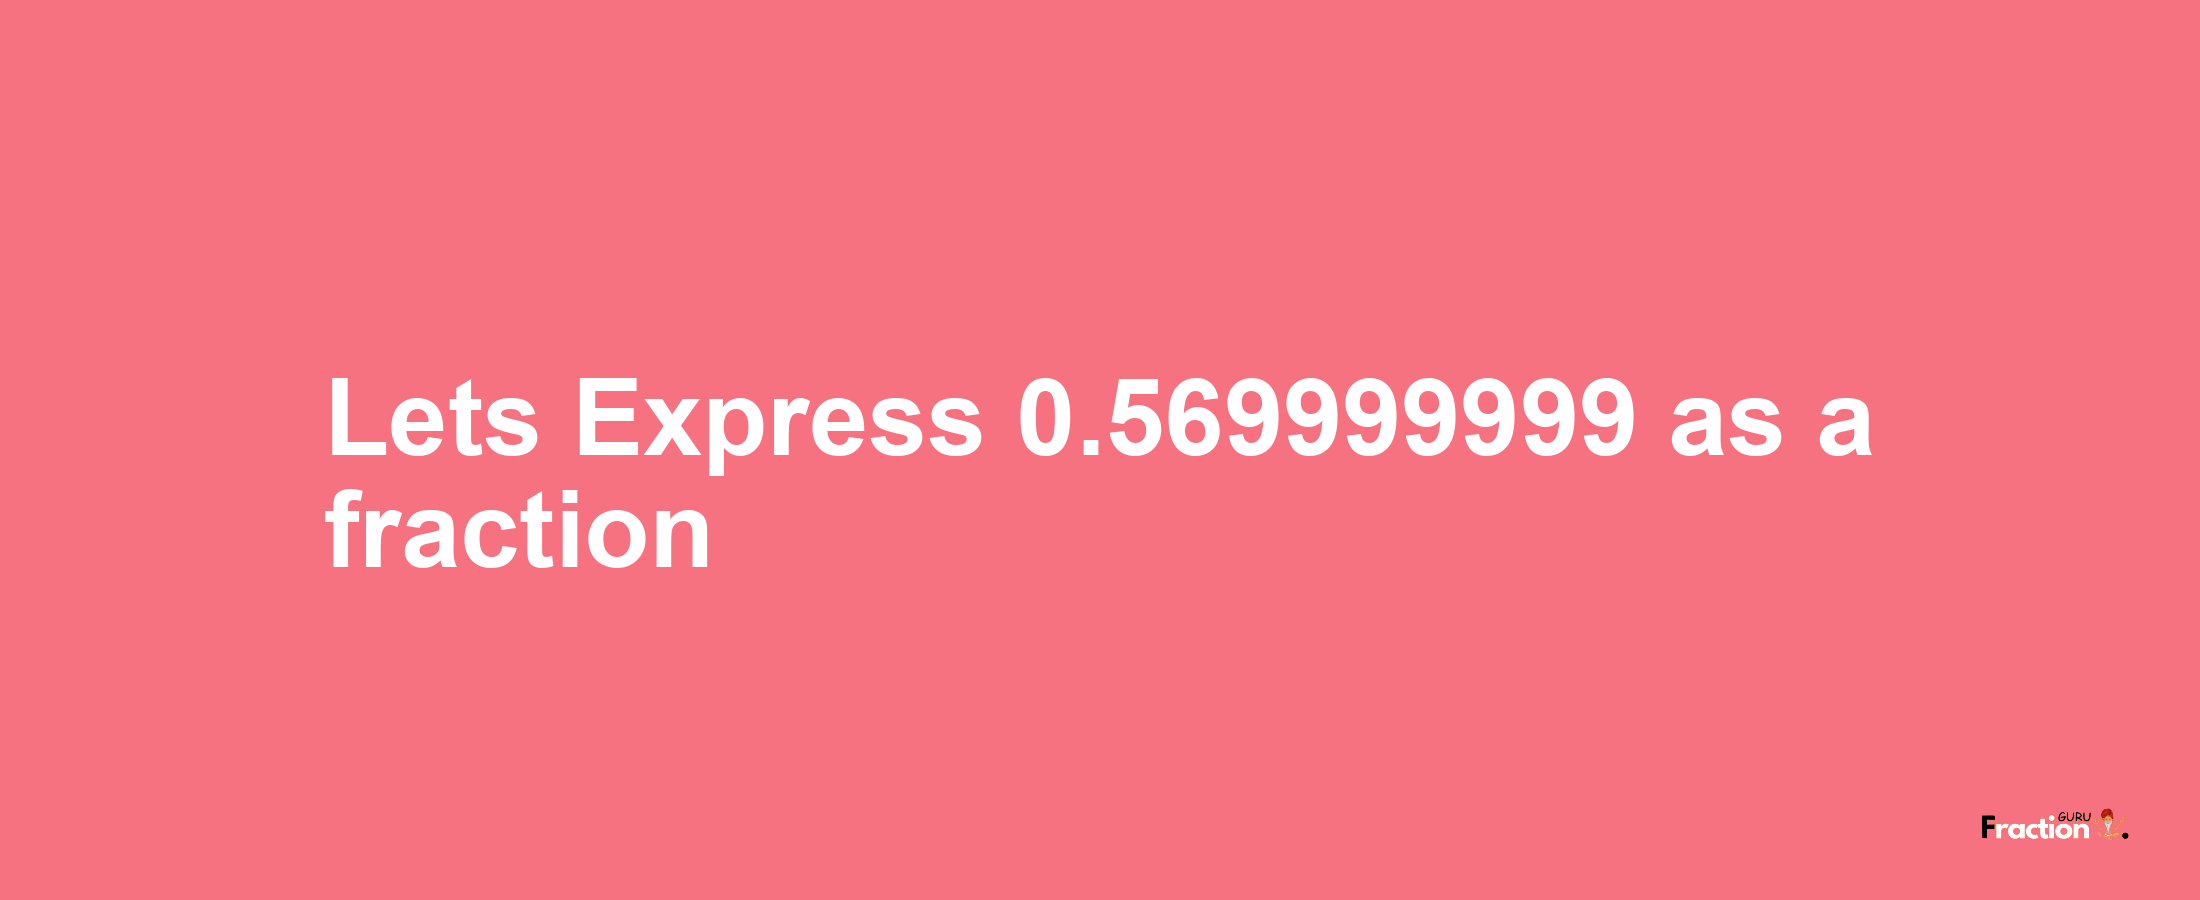 Lets Express 0.569999999 as afraction